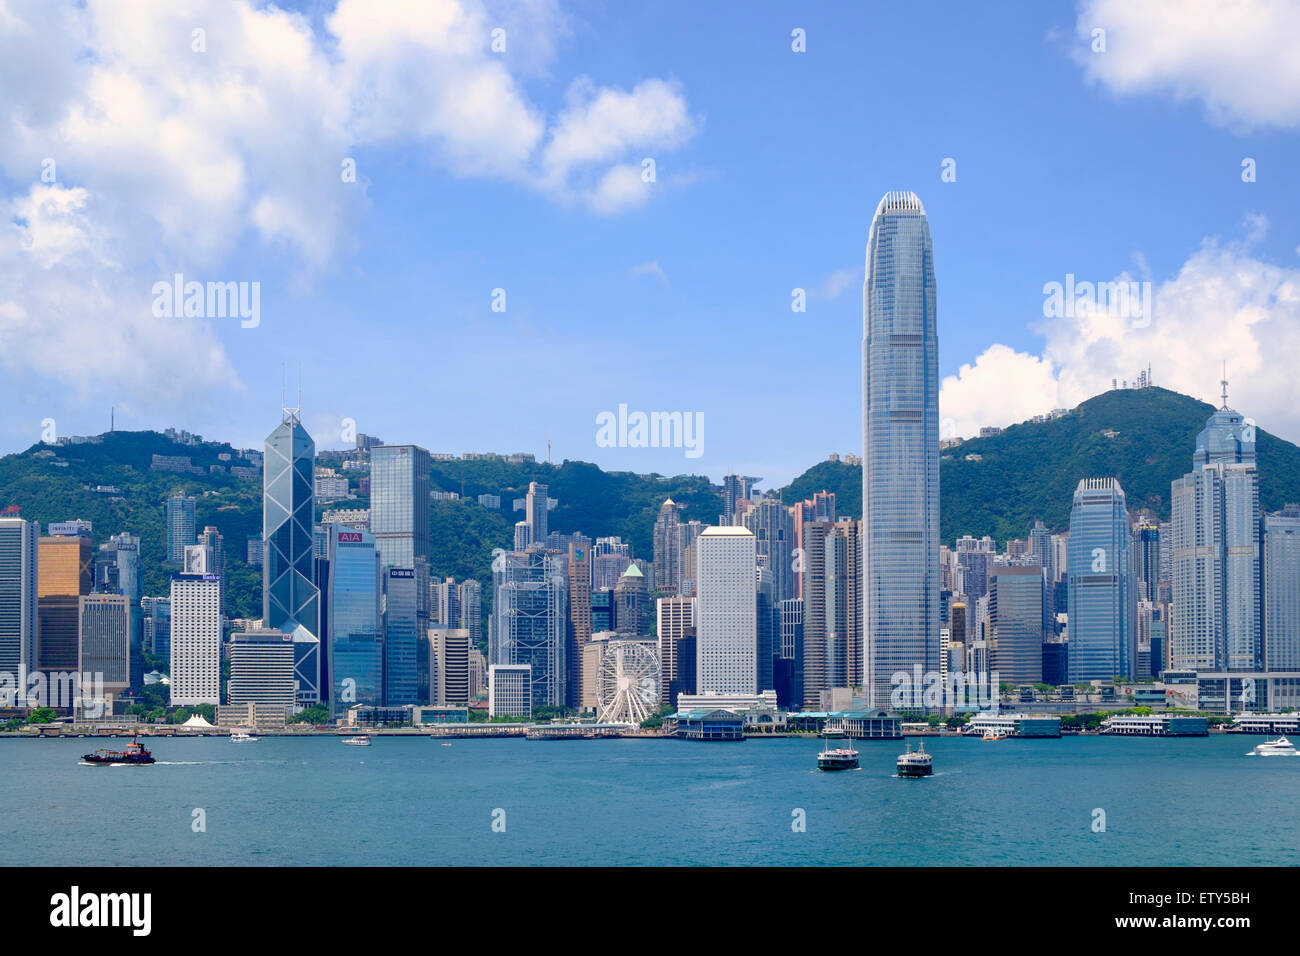 Daytime skyline of skyscrapers in Hong Kong from Kowloon on a clear day Stock Photo